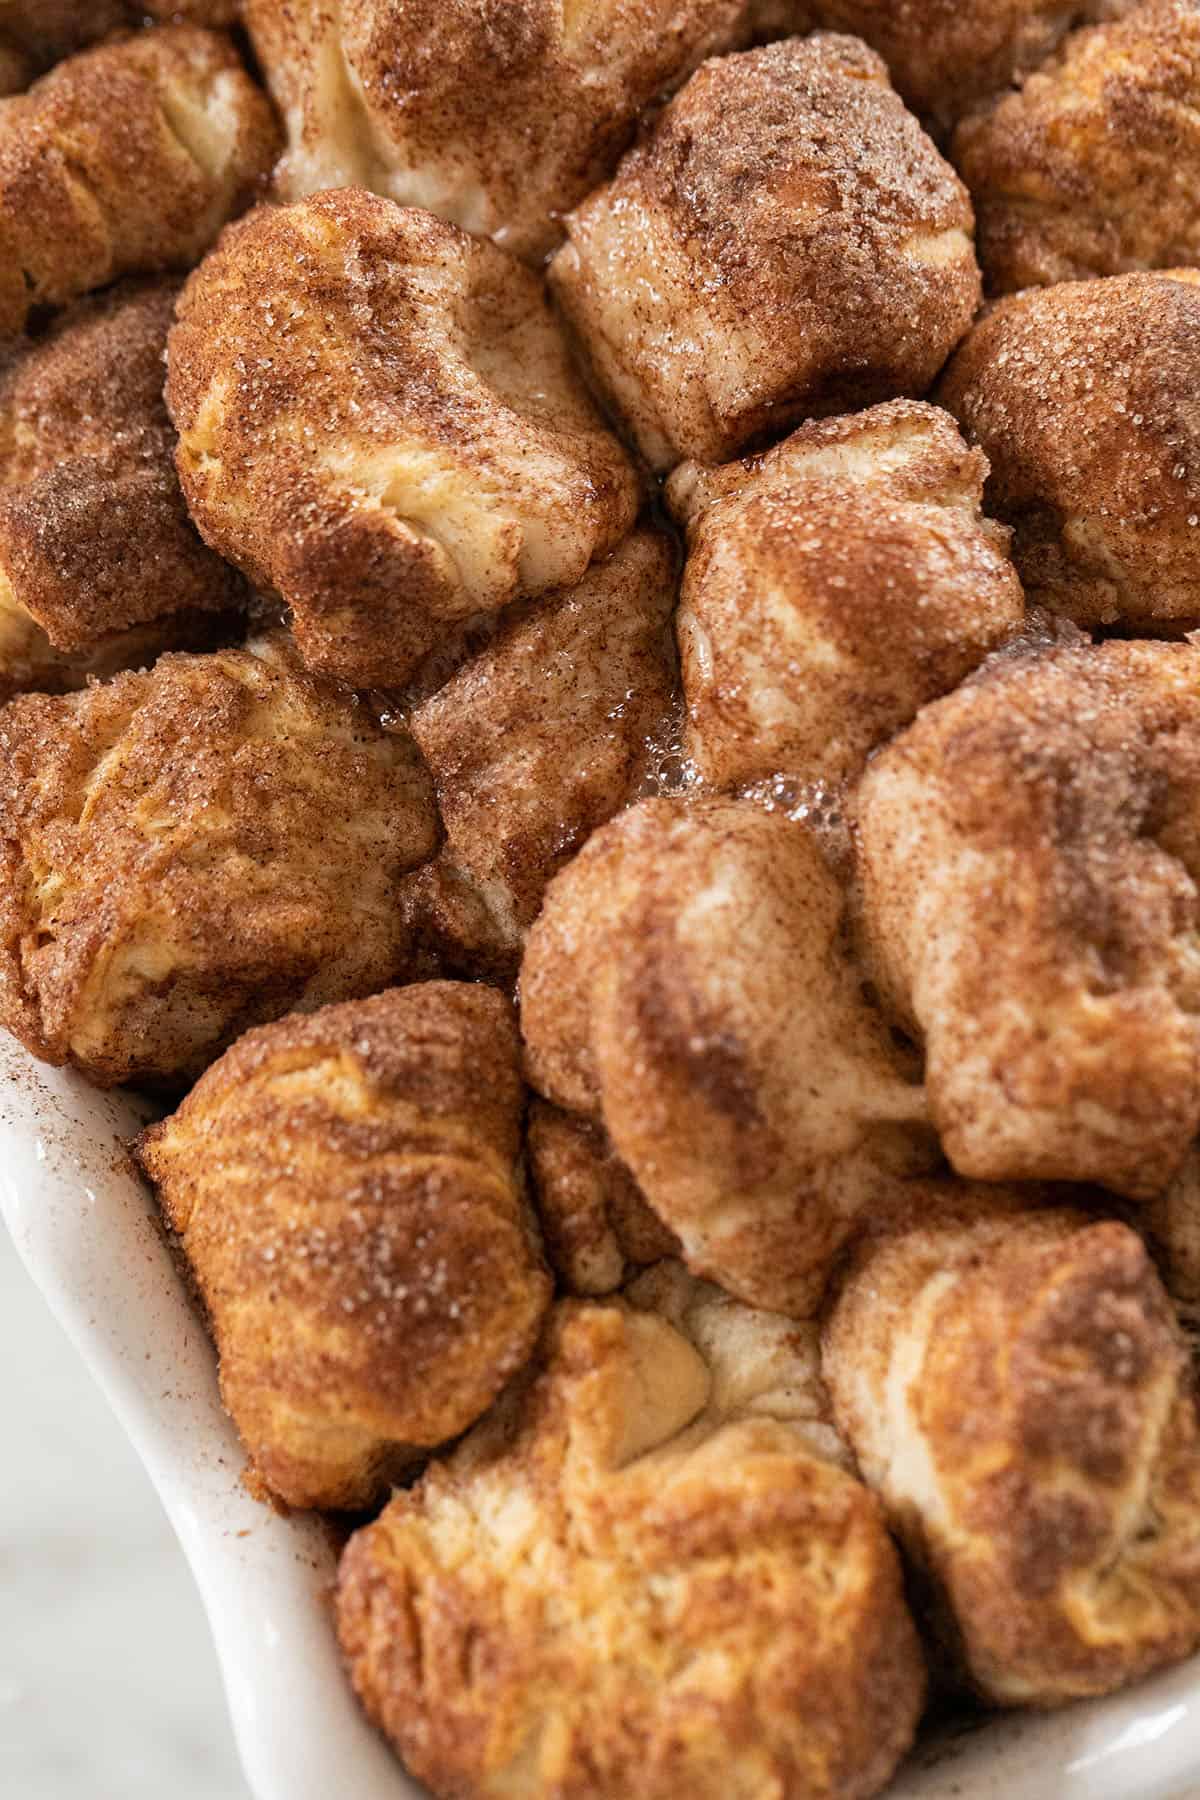 Golden brown monkey bread with gooey butter and cinnamon and sugar.